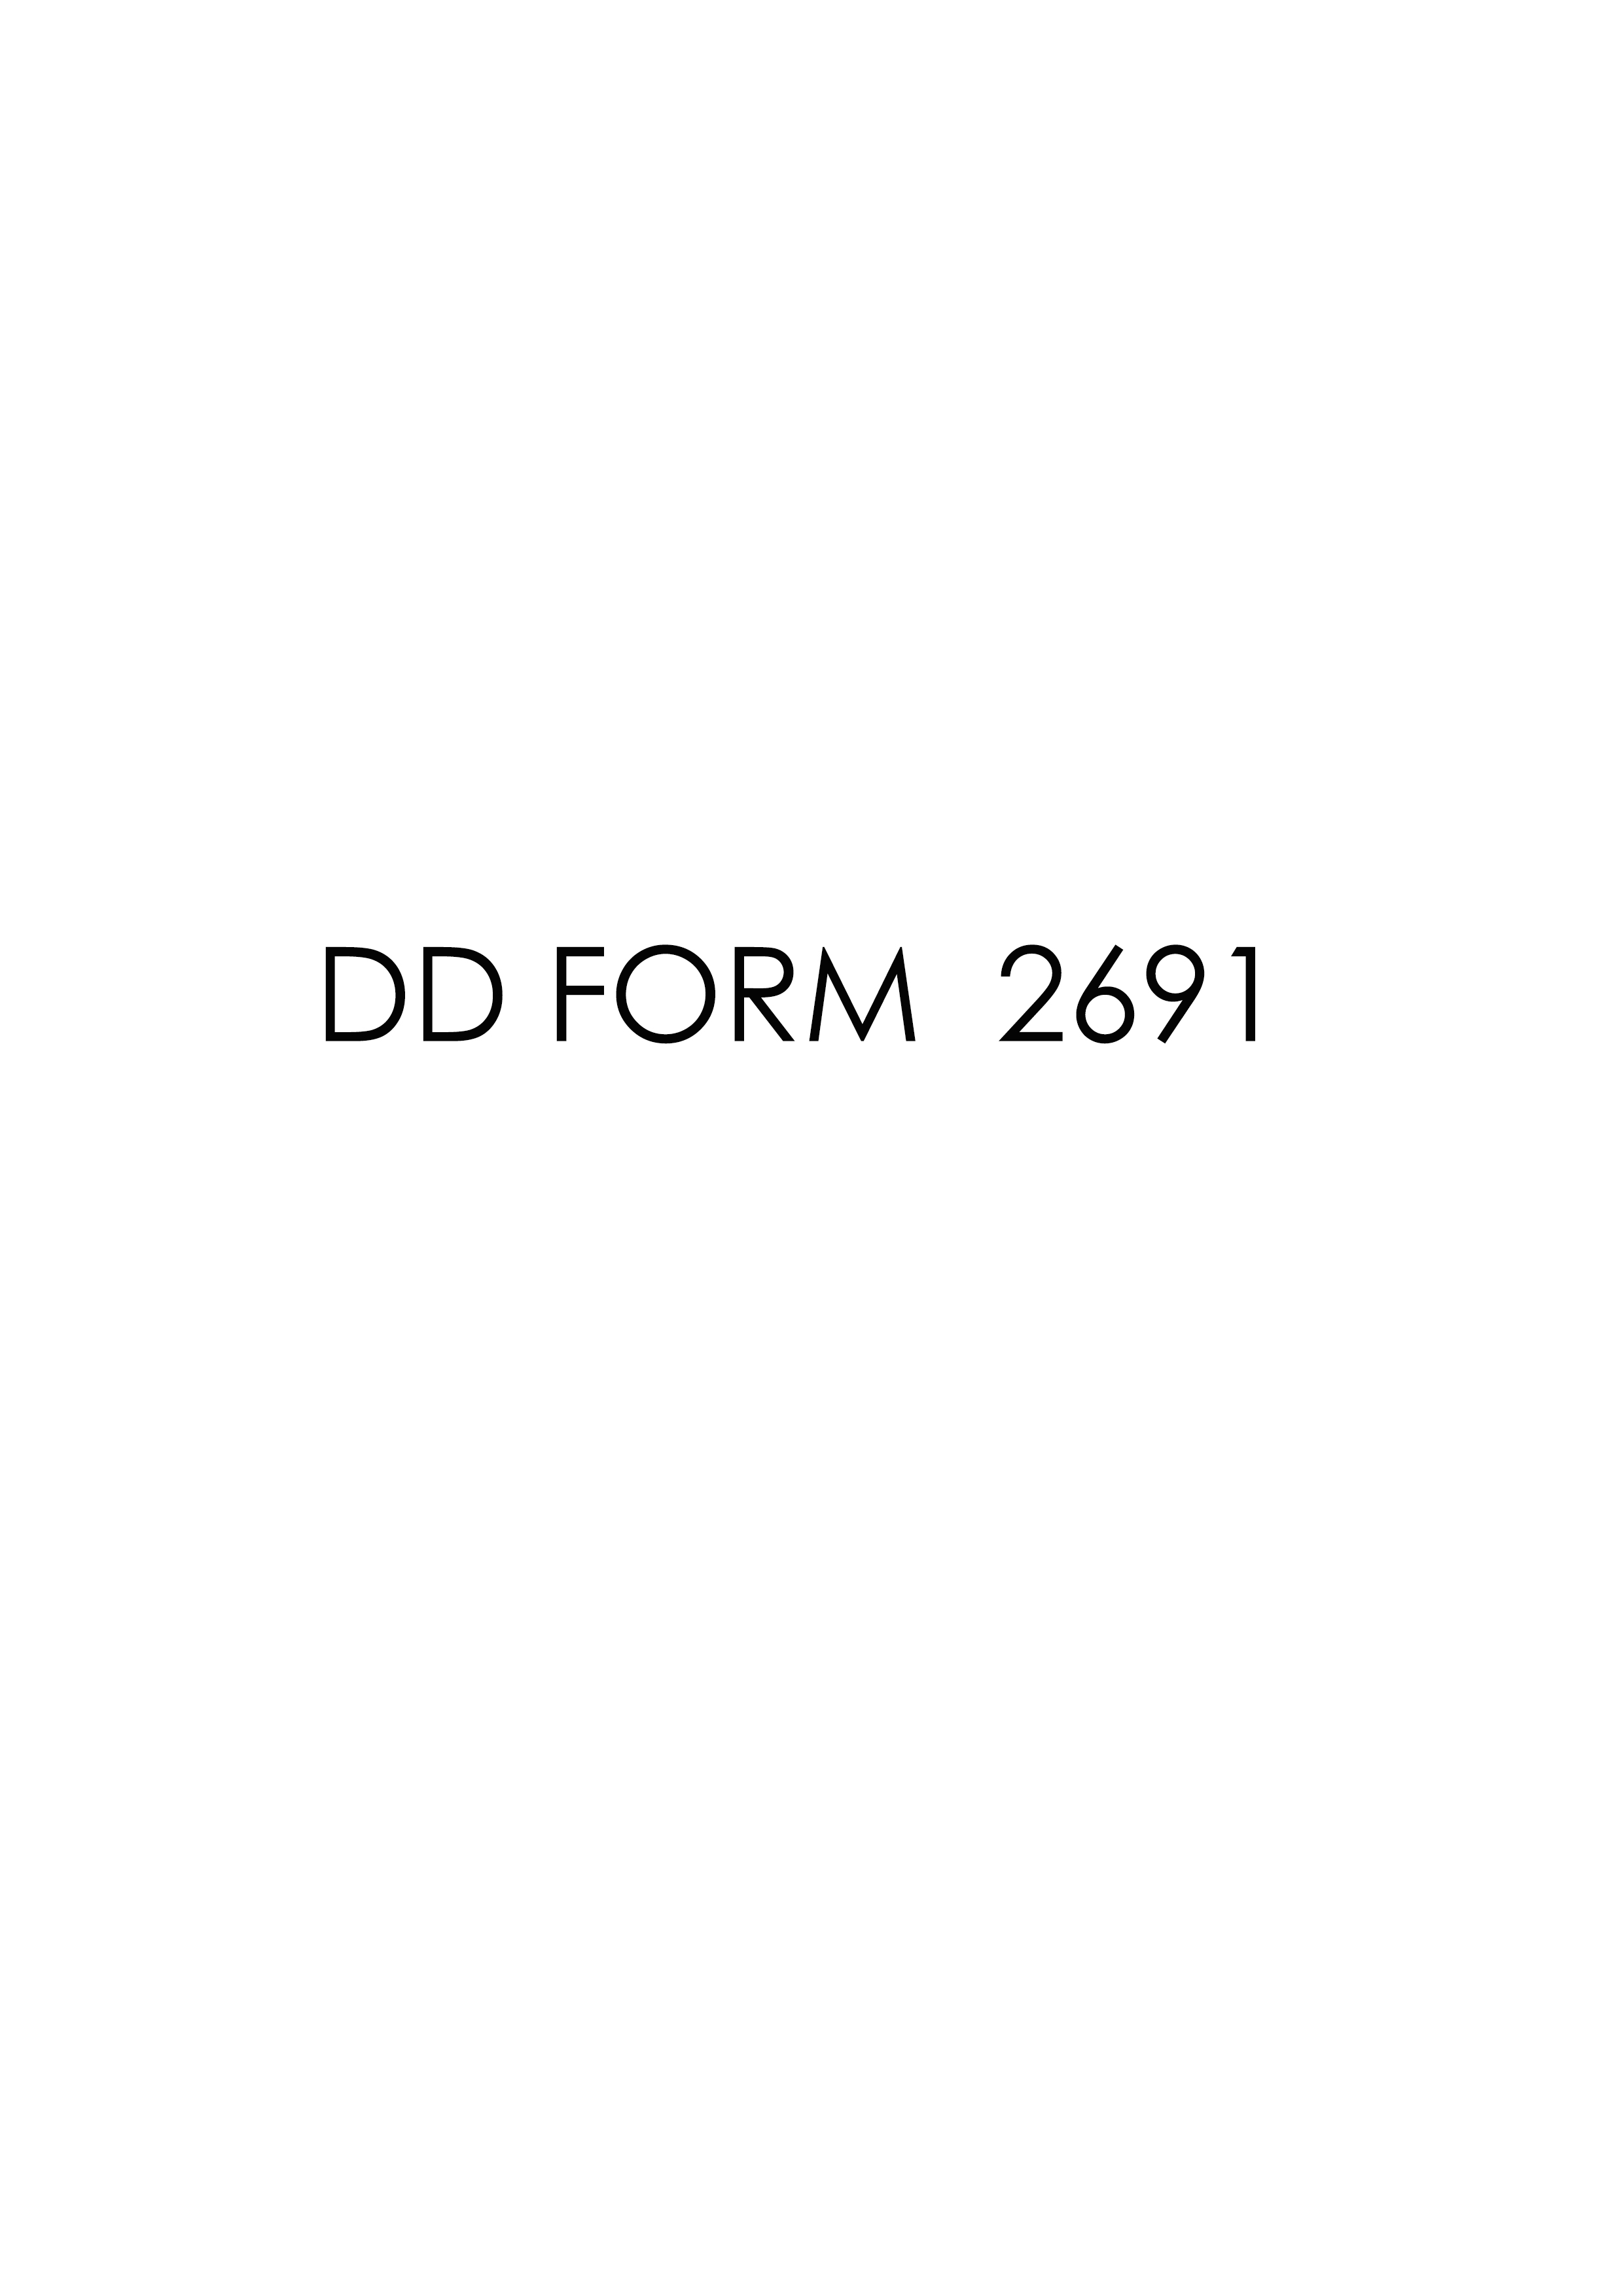 Download Fillable dd Form 2691